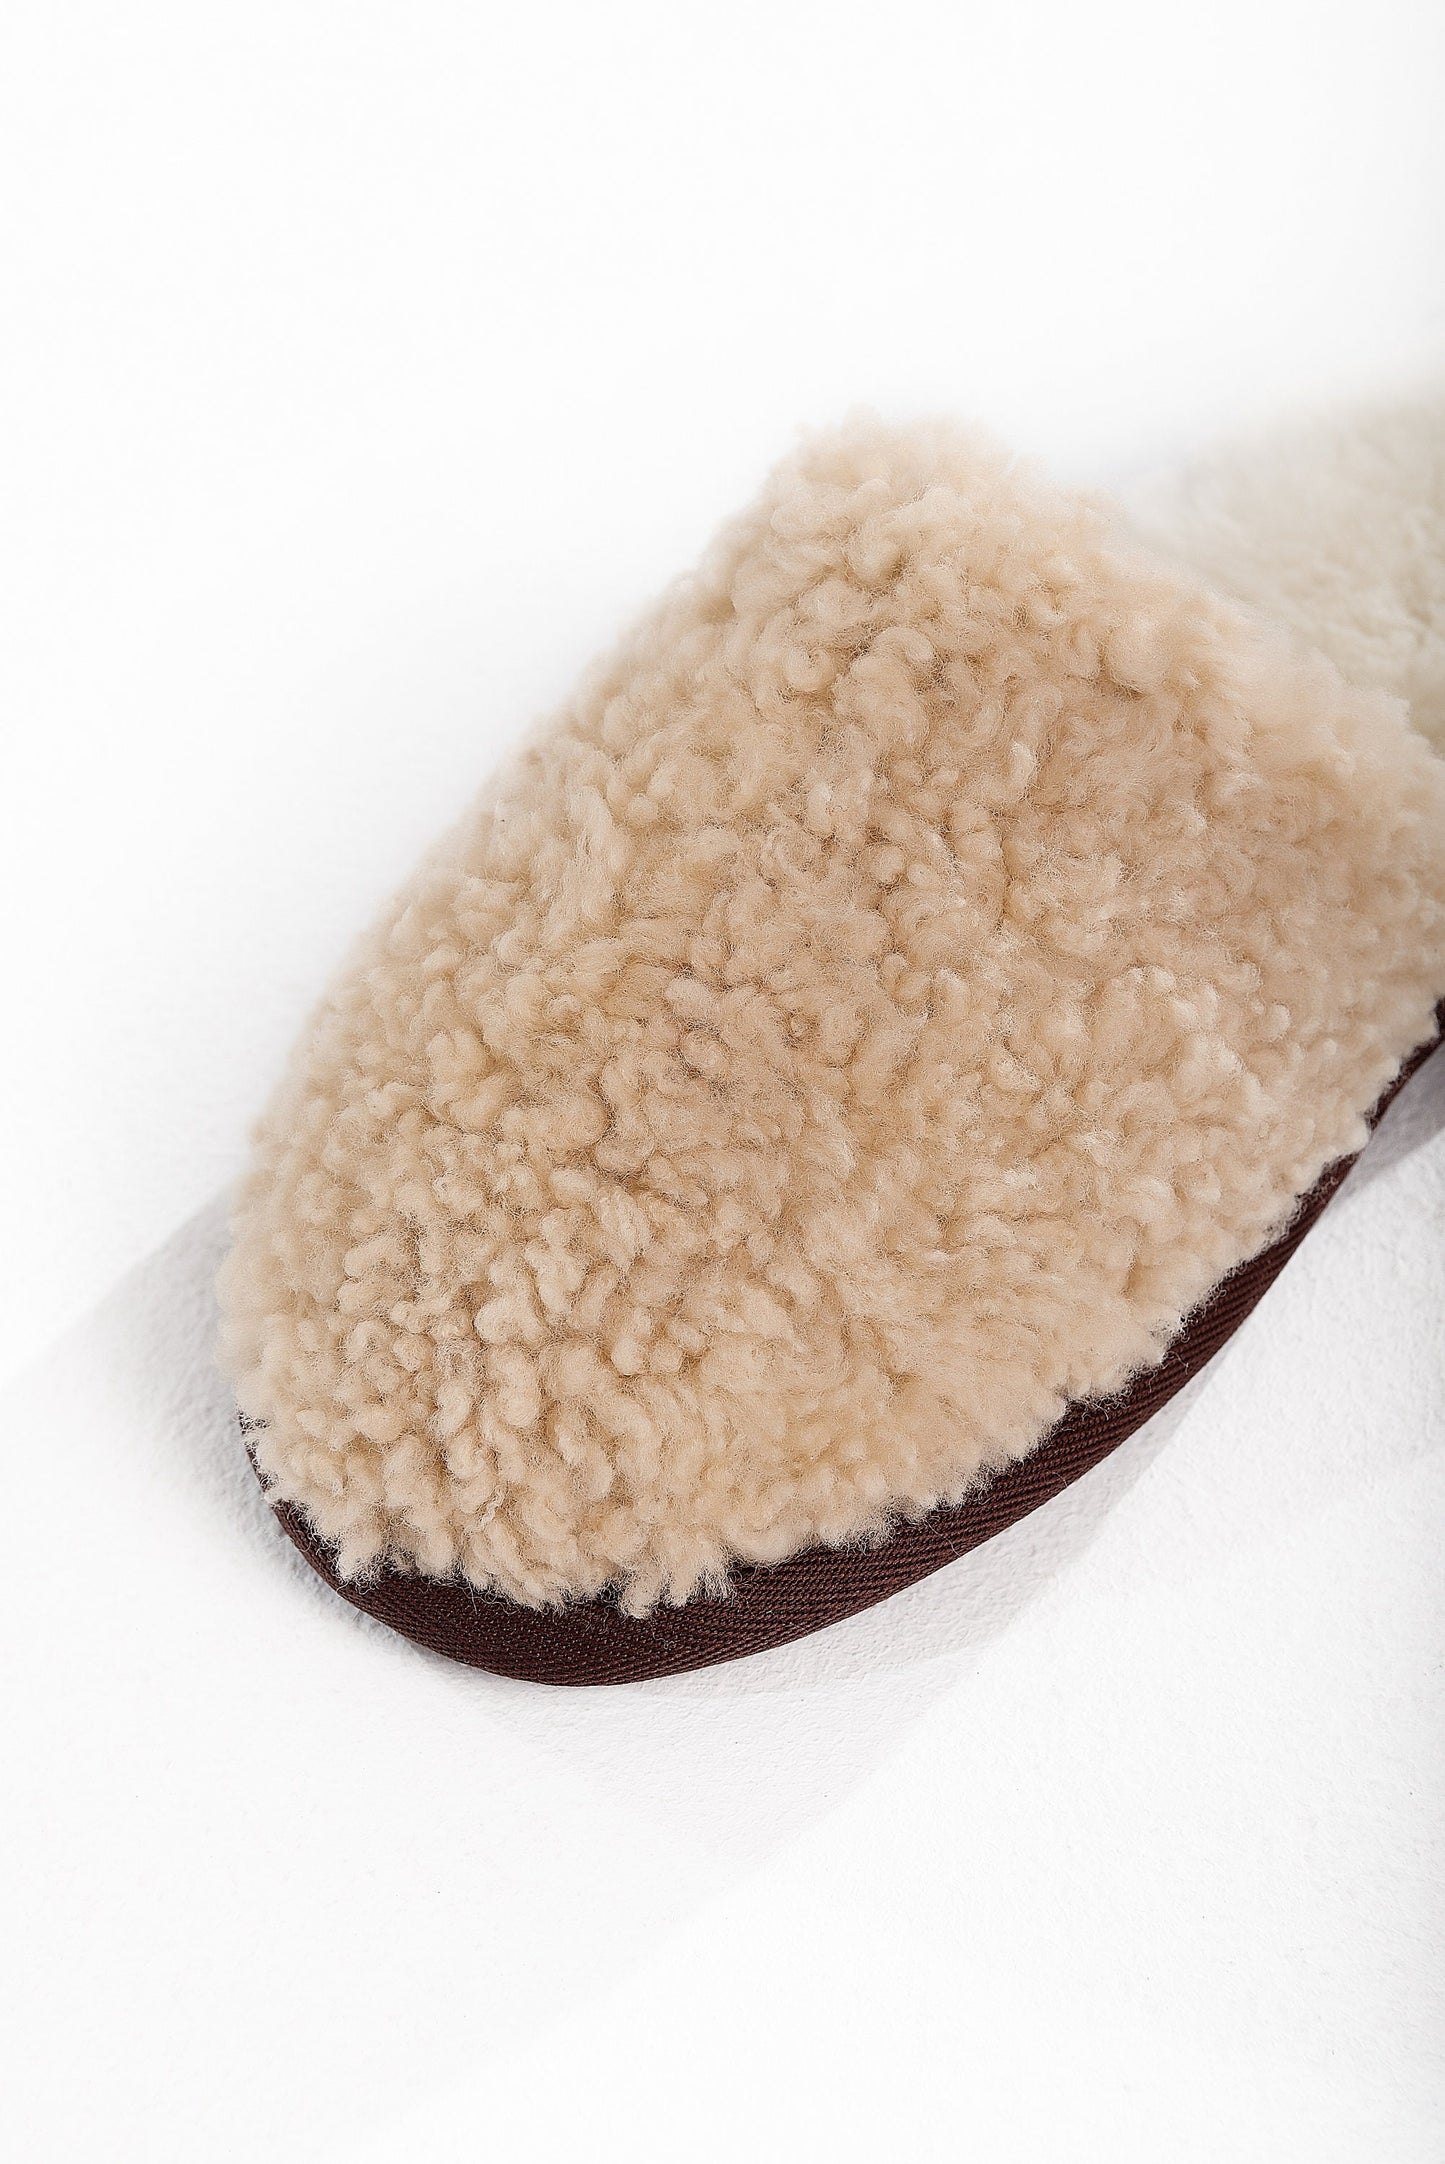 Unisex Women's Real Sheepskin Slippers in Beige Color with Fur Lining